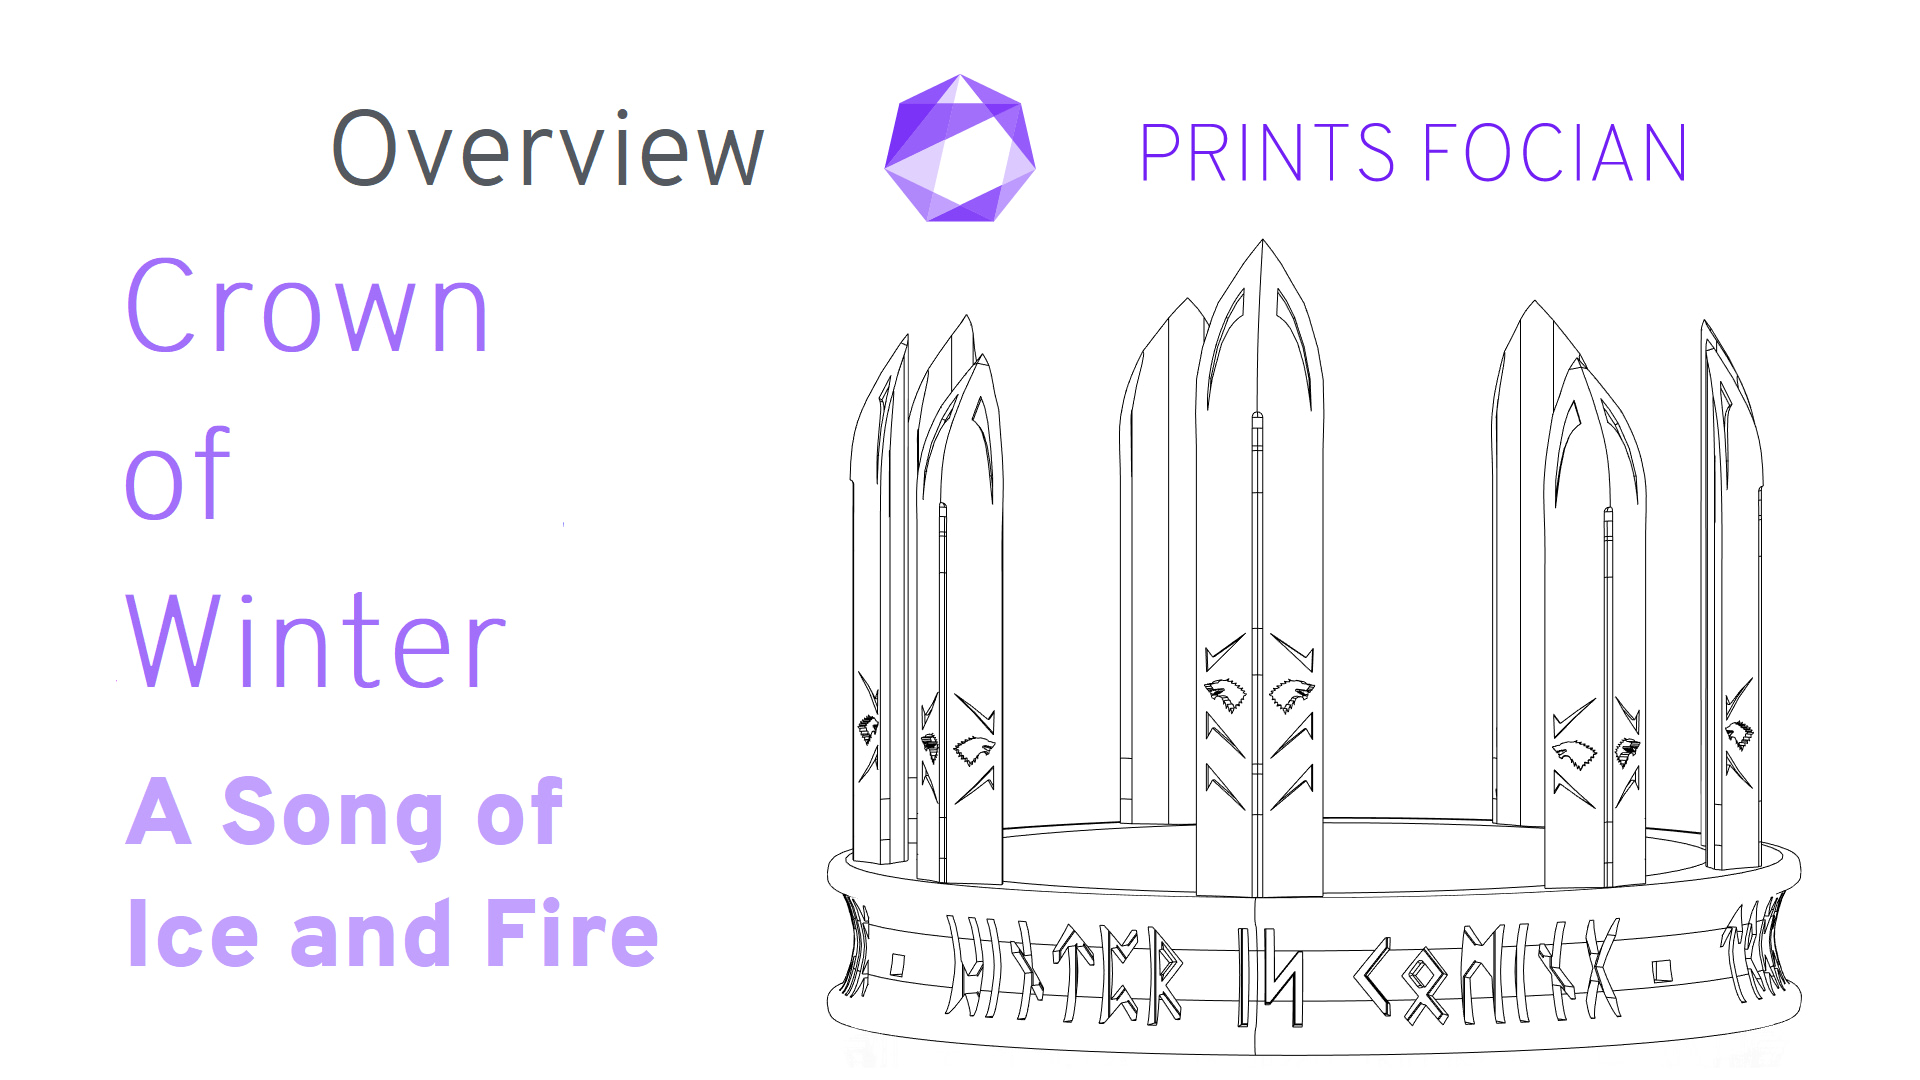 Wireframe image of the Crown of WInter on a white background. Prints Focian Icon top and central. Text: Purple Prints Focian, Crown of Winter, A Song of Ice and Fire and dark grey Overview